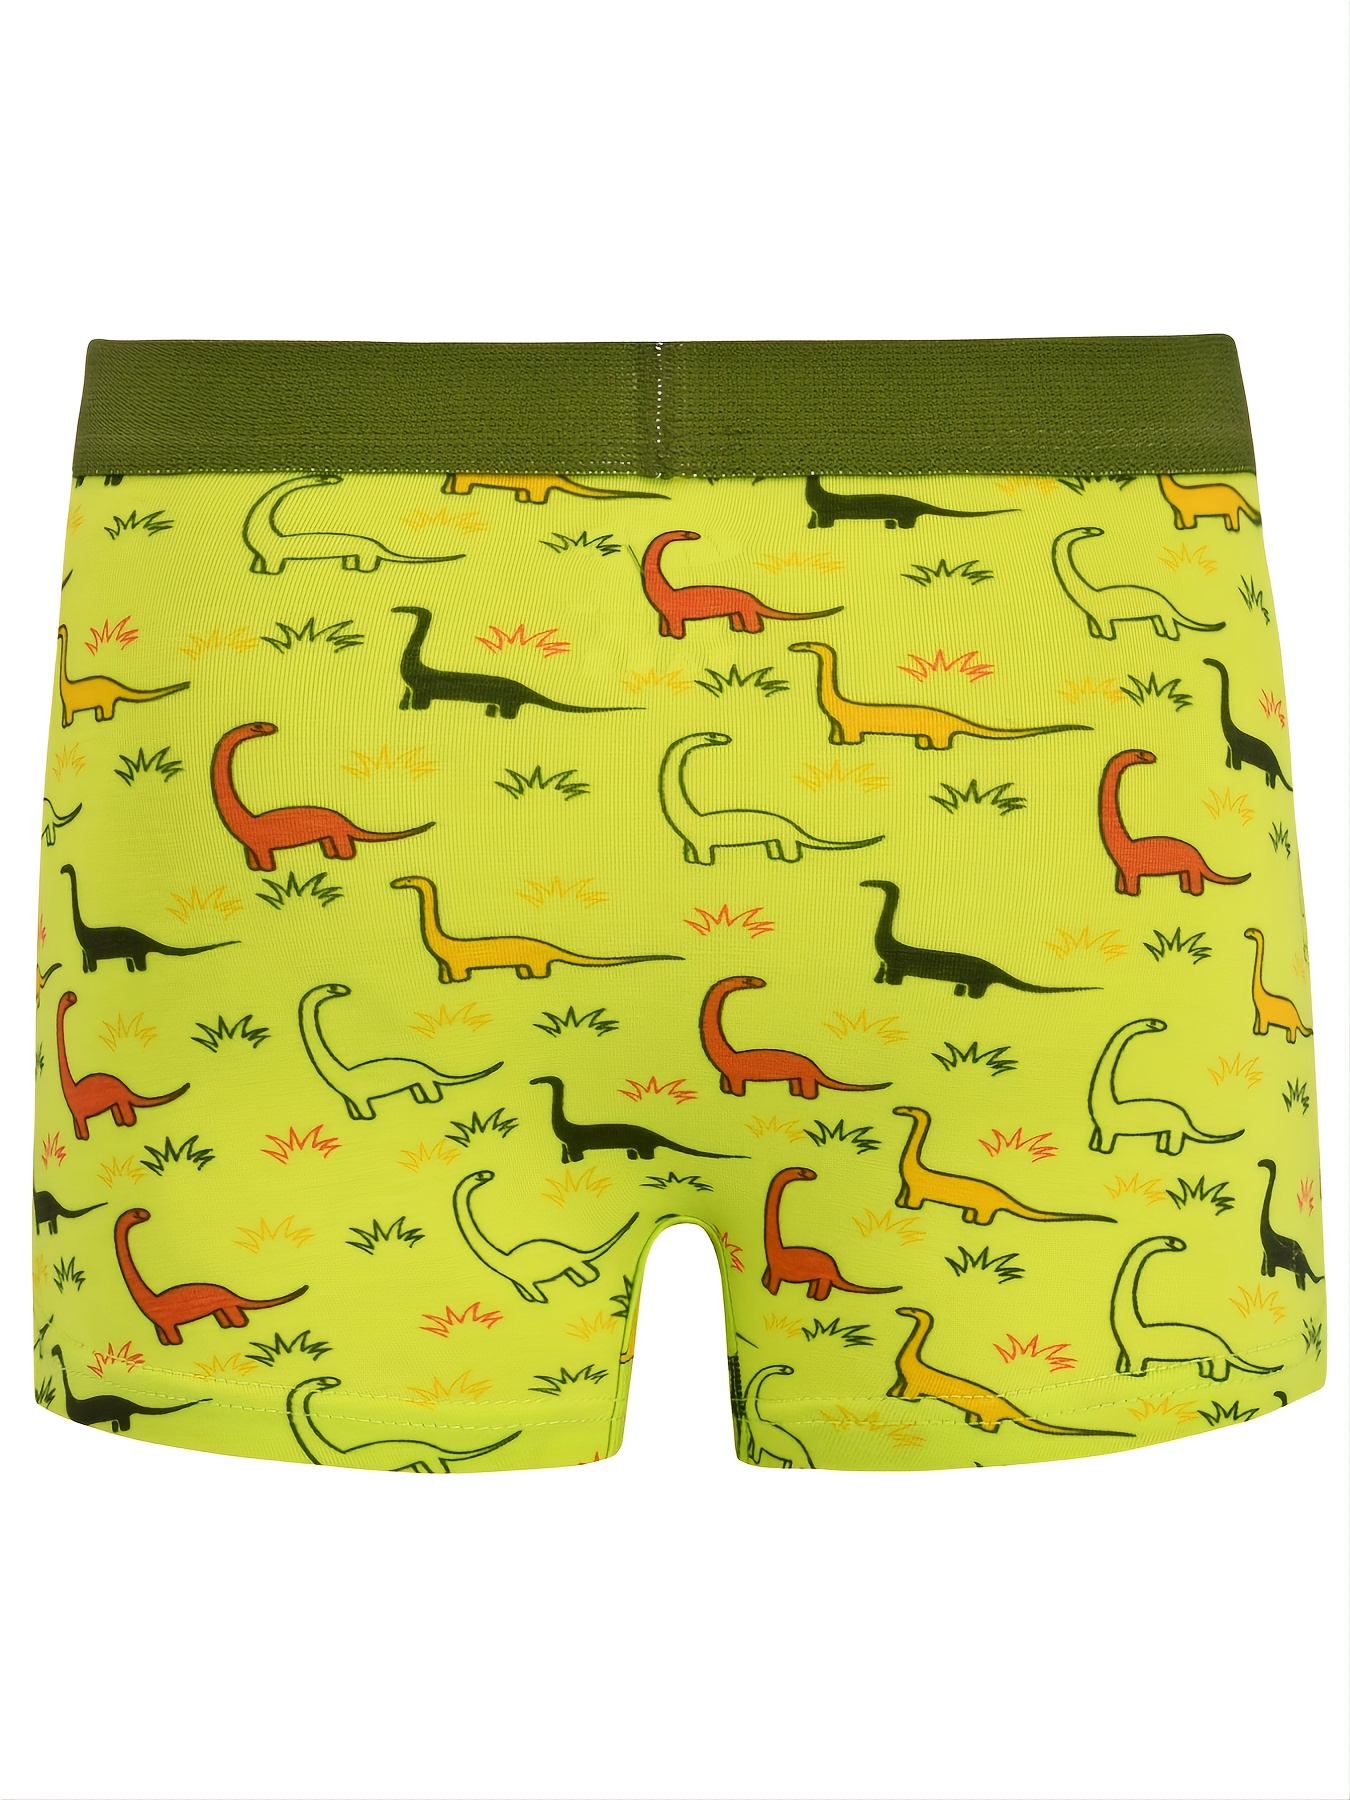 2-Pack Customize Cartoon Pattern Comfort Cotton Boxers for Boys